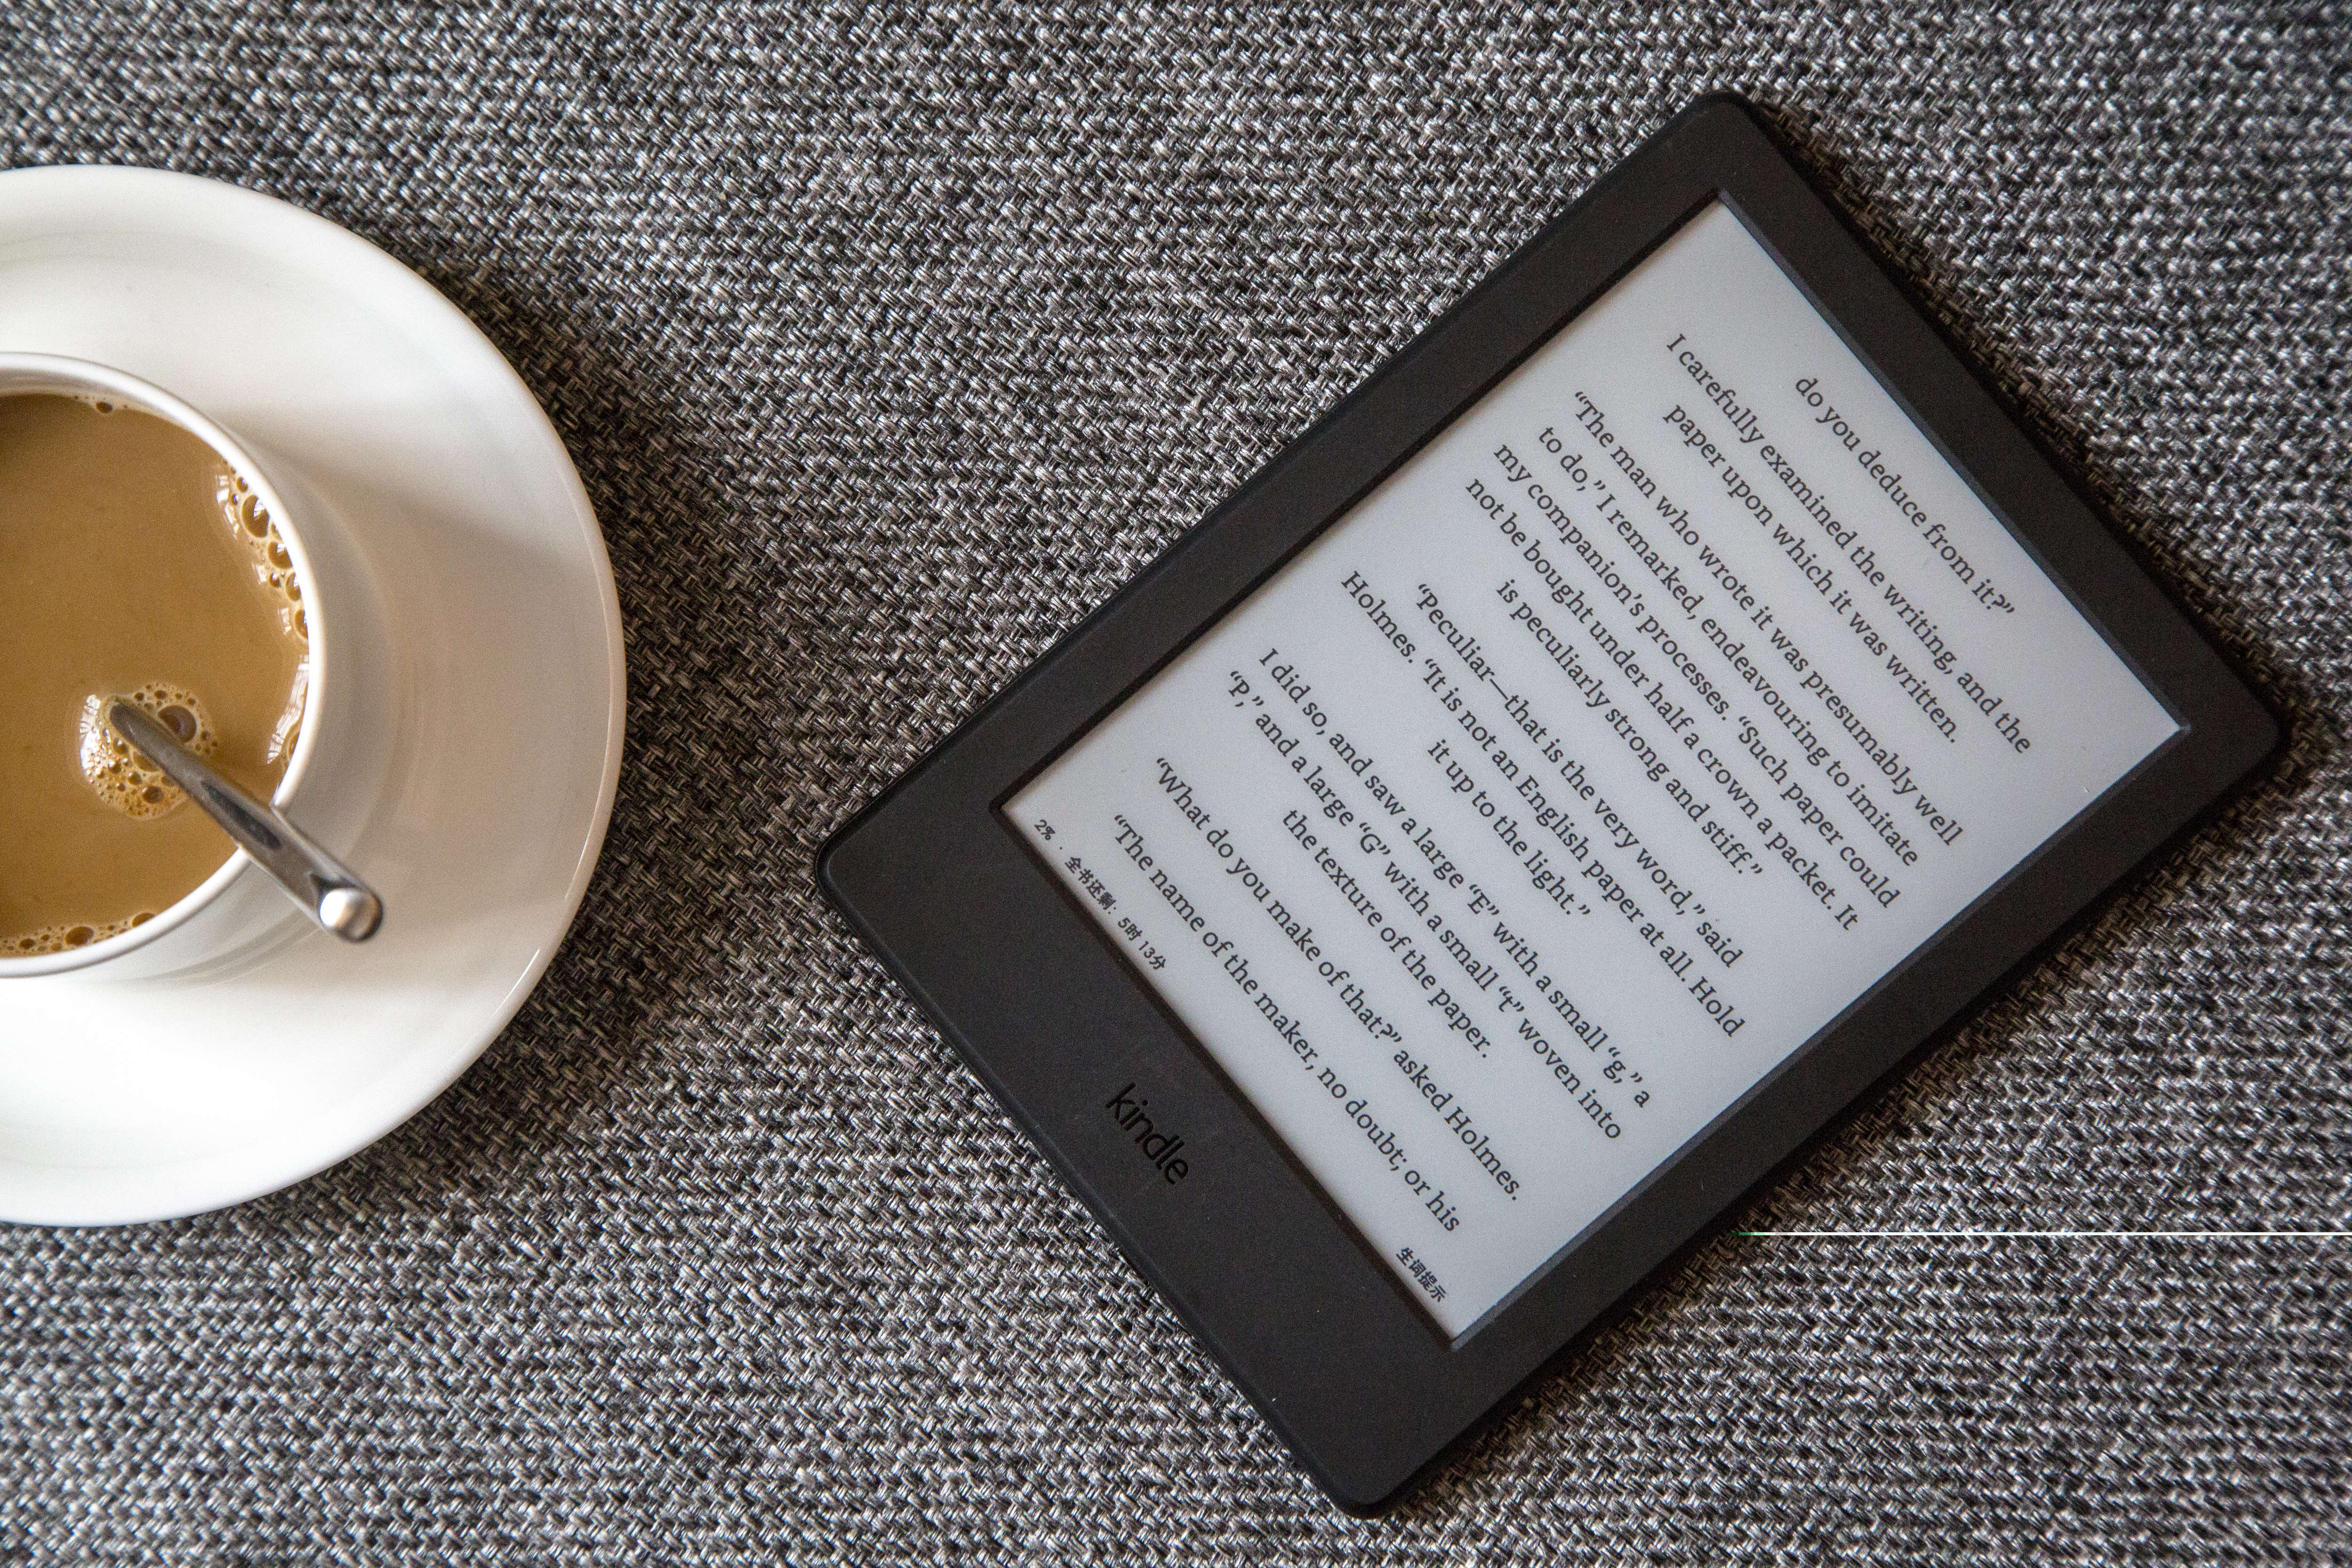 Amazon’s updated e-book return policy looks like a big win for authors